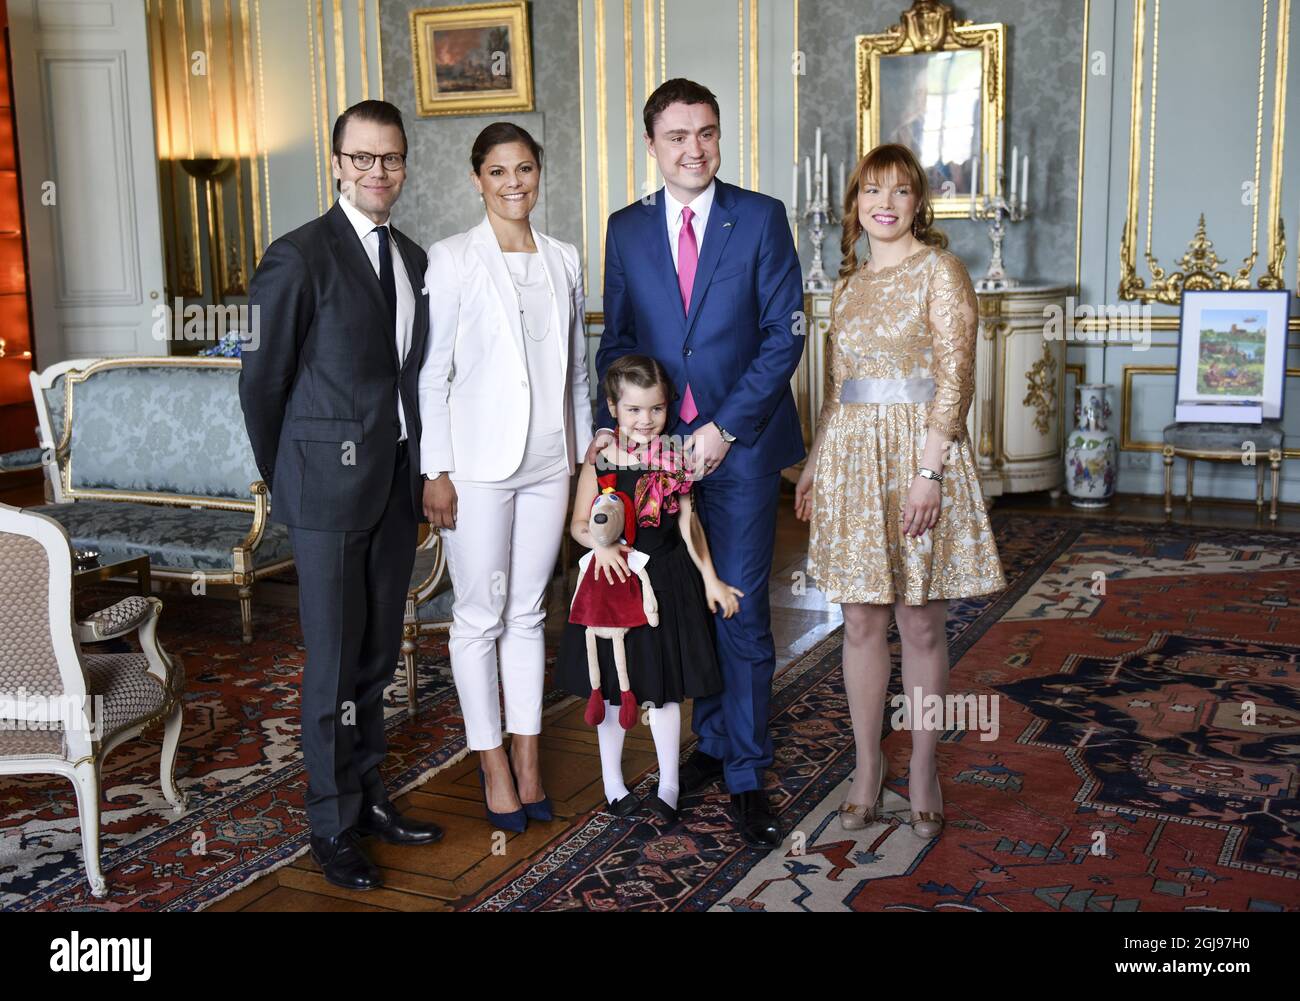 STOCKHOLM 2015-05-27 Swedish Crown Princess Victoria (2nd L) and Prince Daniel (L) during a reception for Estonian PM Taavi RÃµivas (2nd R), his daughter Miina RÃµivas (C) and 1st lady Luisa Vark at the Royal Palace in Stockholm, Sweden, May 27, 2015. RÃµivas visited Sweden for bilateral talks Wednesday. Photo Bertil Ericson / TT / Code 10000 ** SWEDEN OUT ** Stock Photo